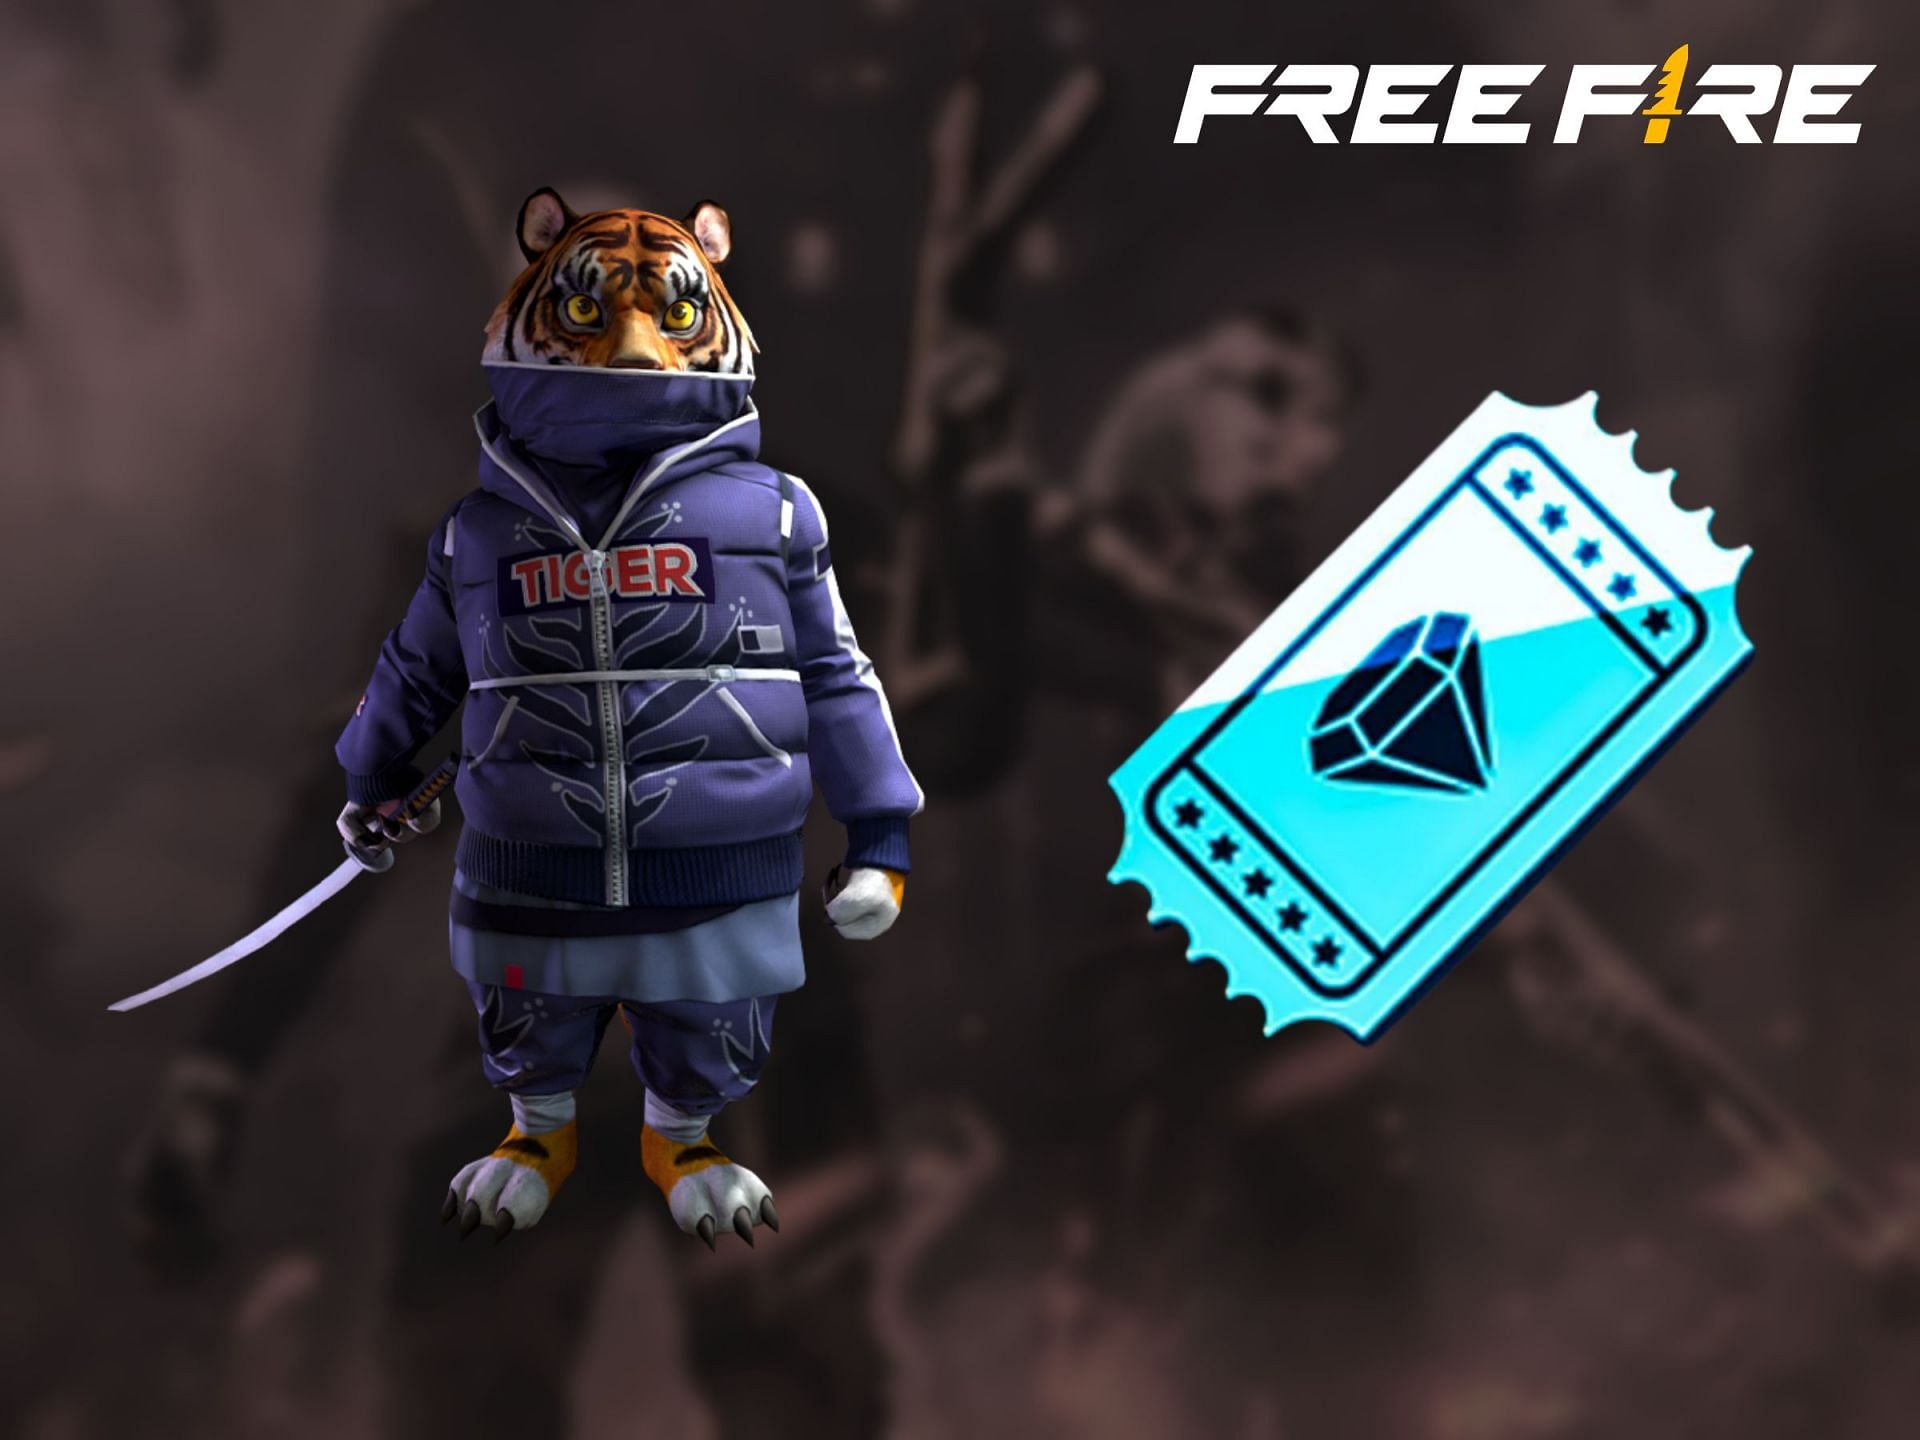 Free Fire redeem codes are an excellent way to receive free items (Image via Sportskeeda)